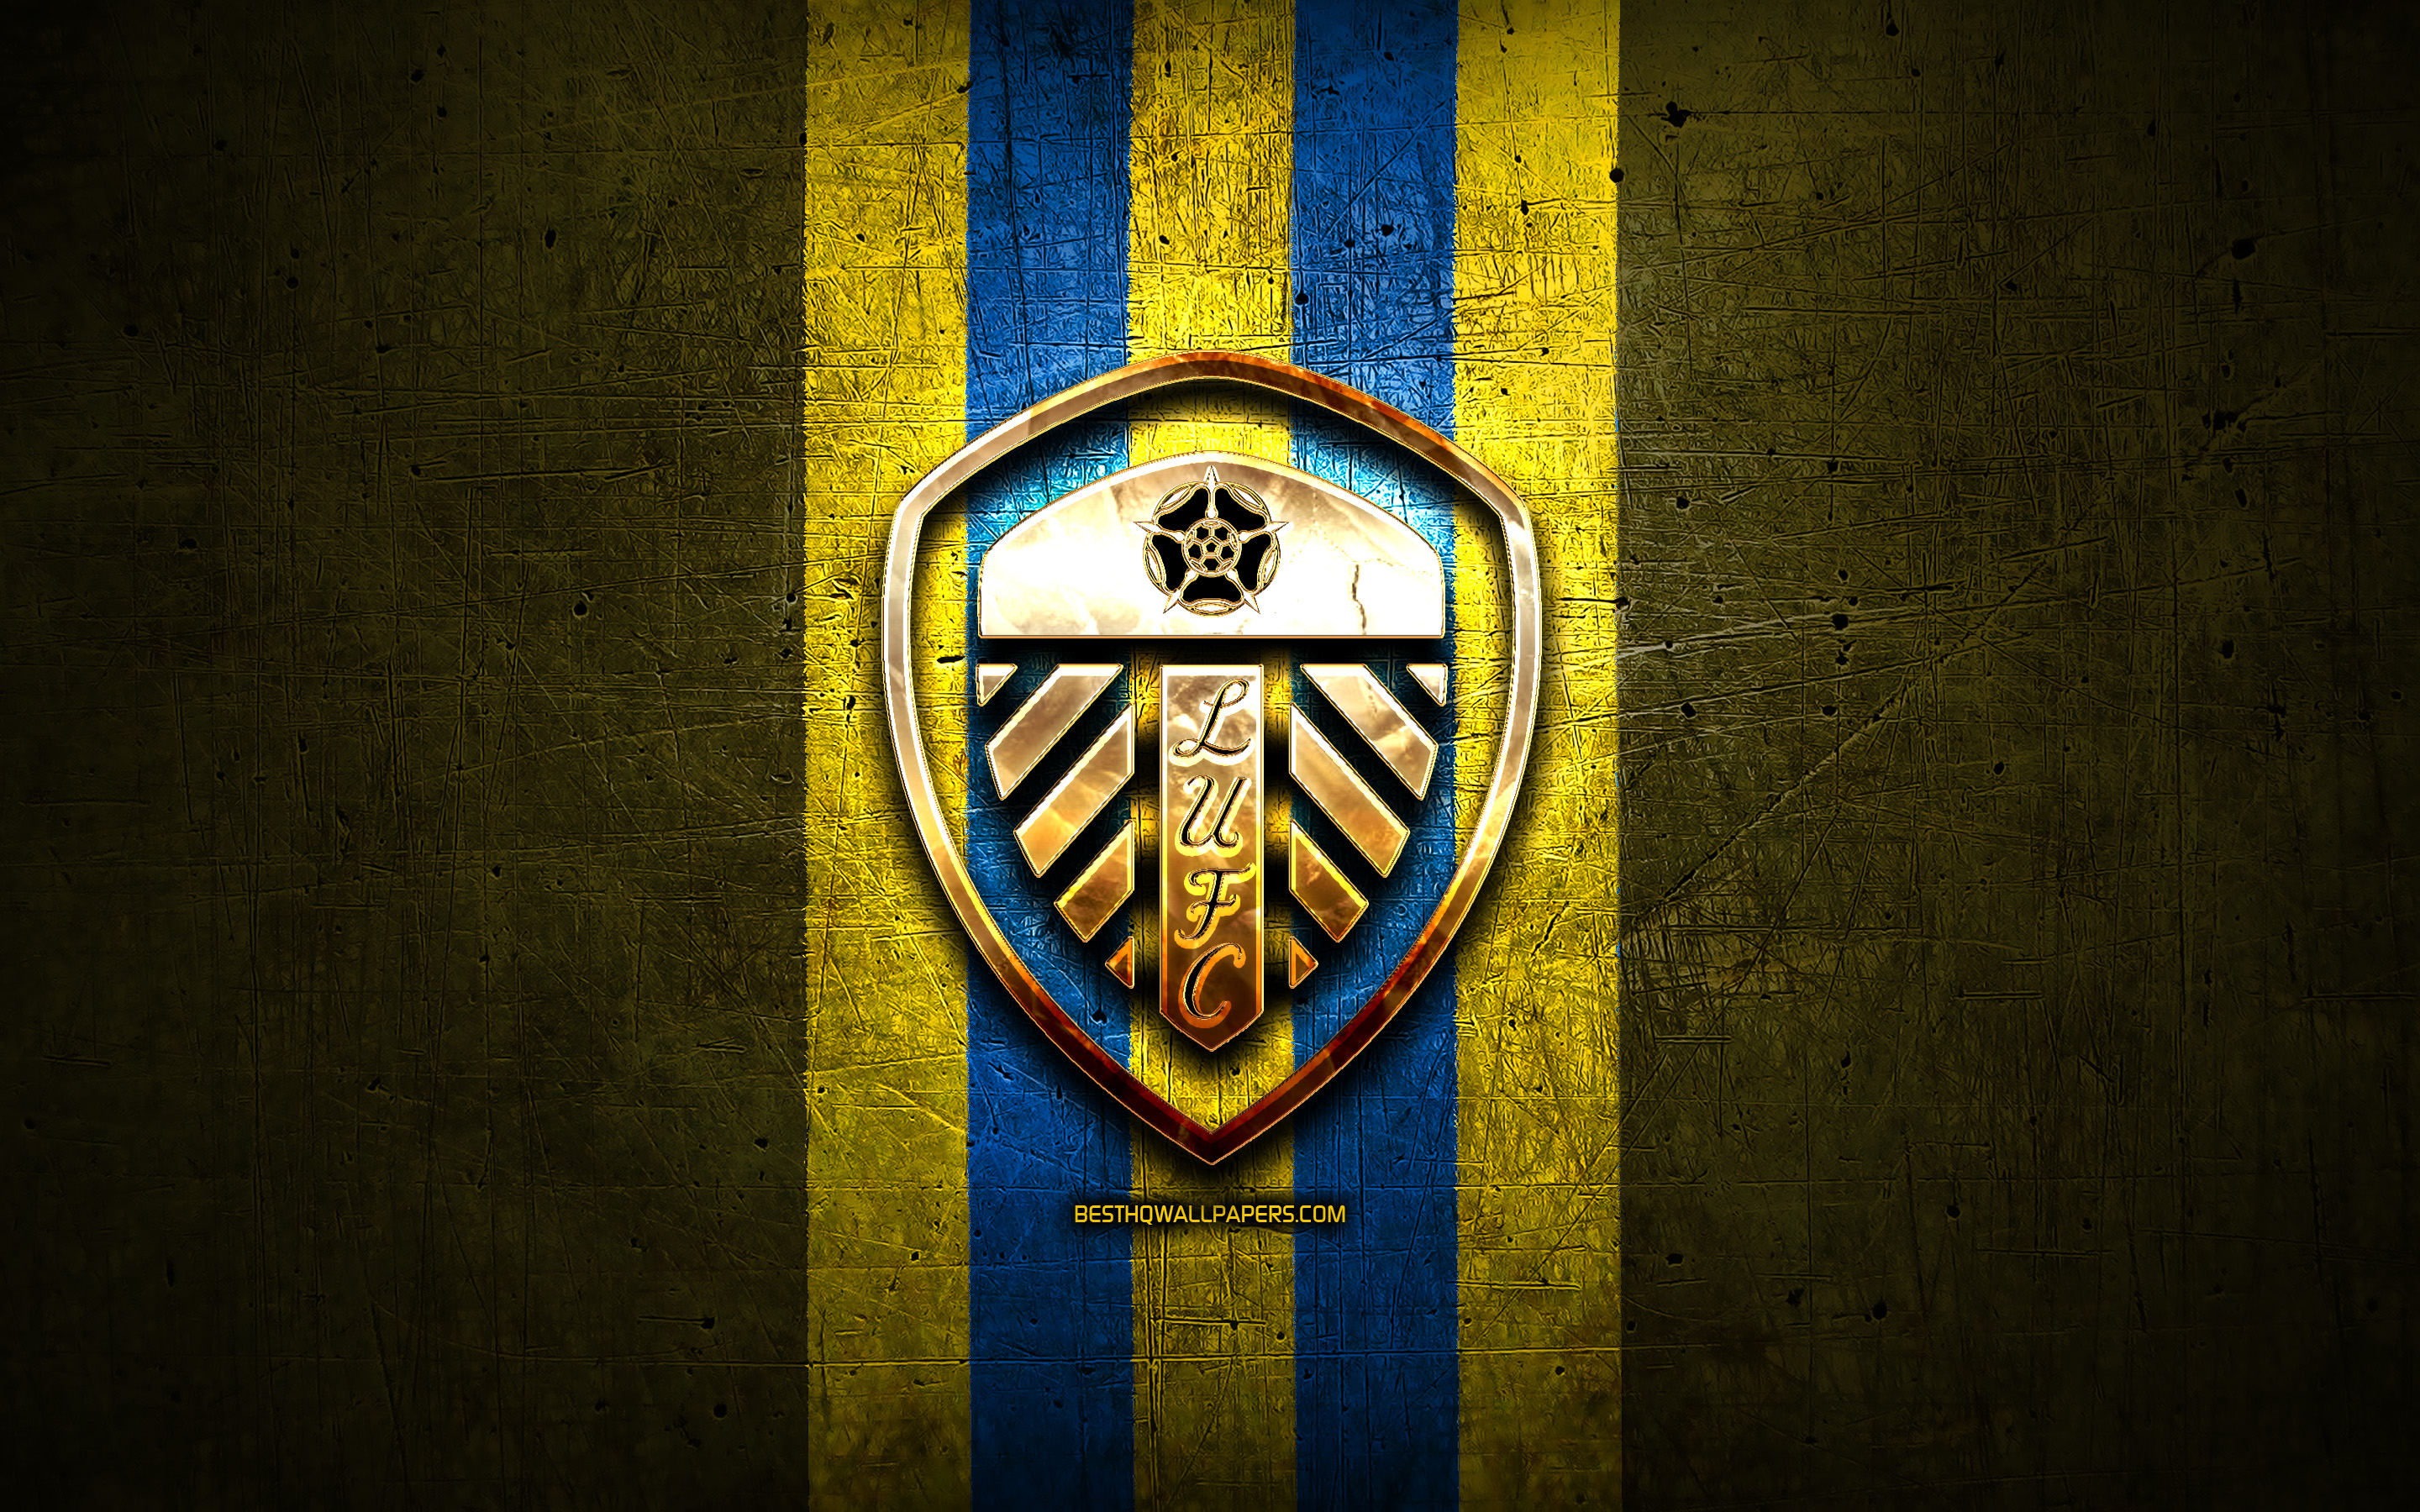 Download wallpaper Leeds United FC, golden logo, EFL Championship, yellow metal background, football, Leeds United, english football club, Leeds United logo, soccer, England for desktop with resolution 2880x1800. High Quality HD picture